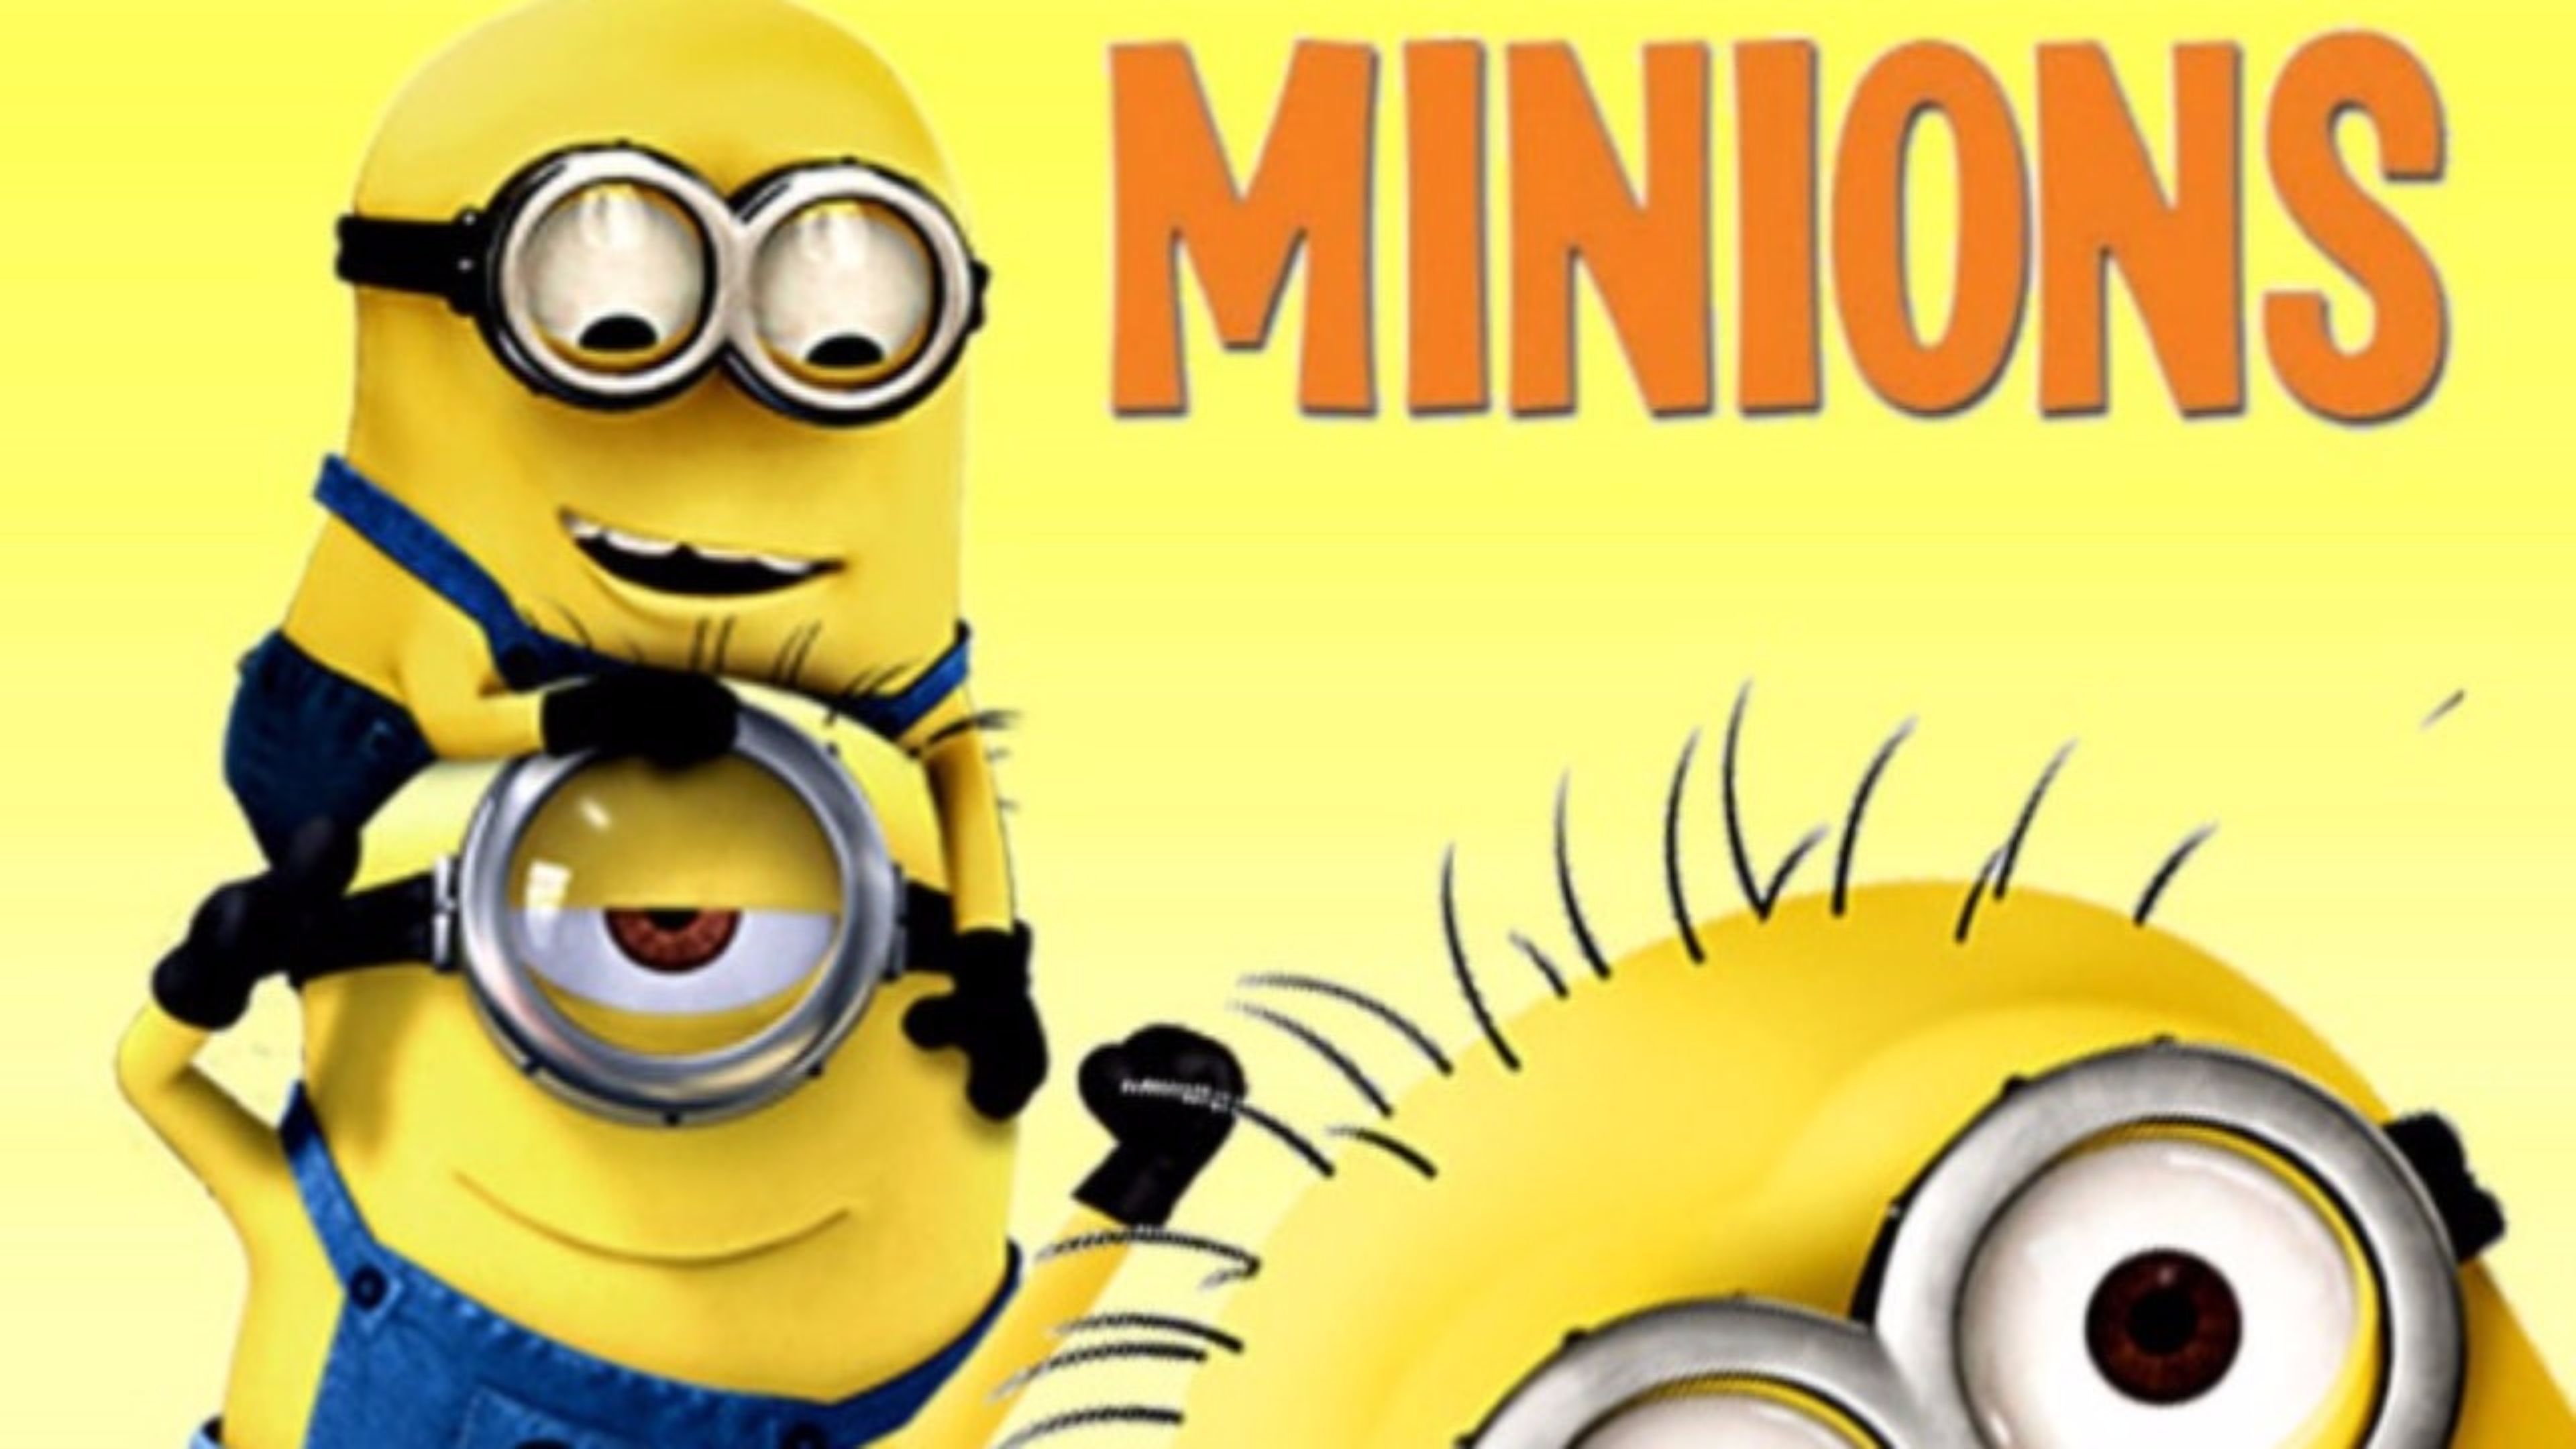 Minions Wallpapers Photos And Desktop Backgrounds Up To 8k 7680x4320 Resolution